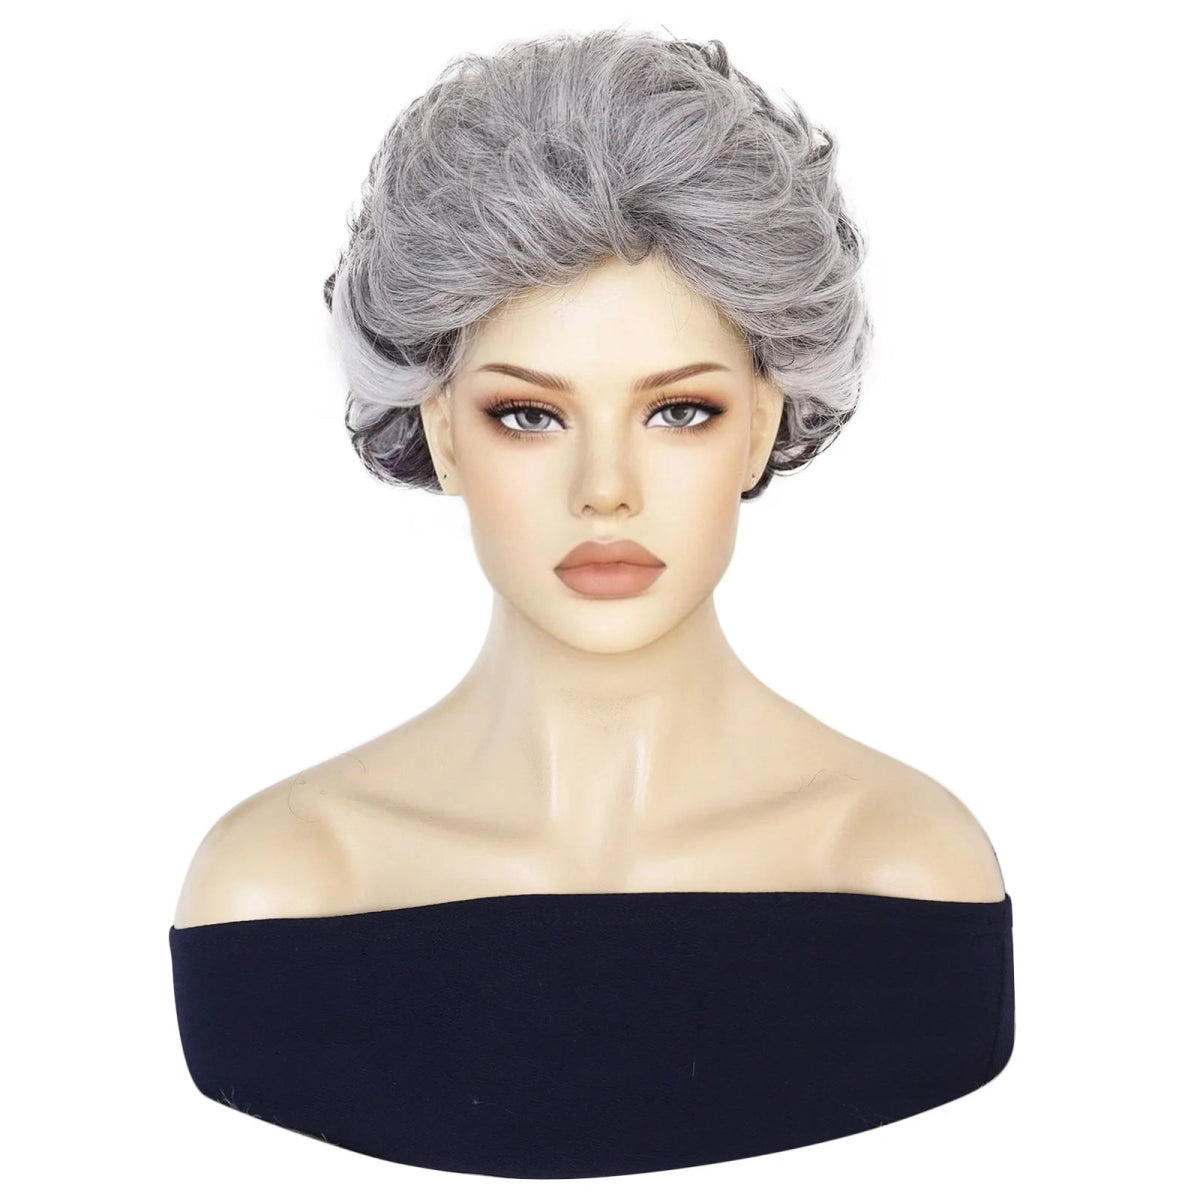 Grey Vintage Old Lady Short Synthetic Wig - HairNjoy